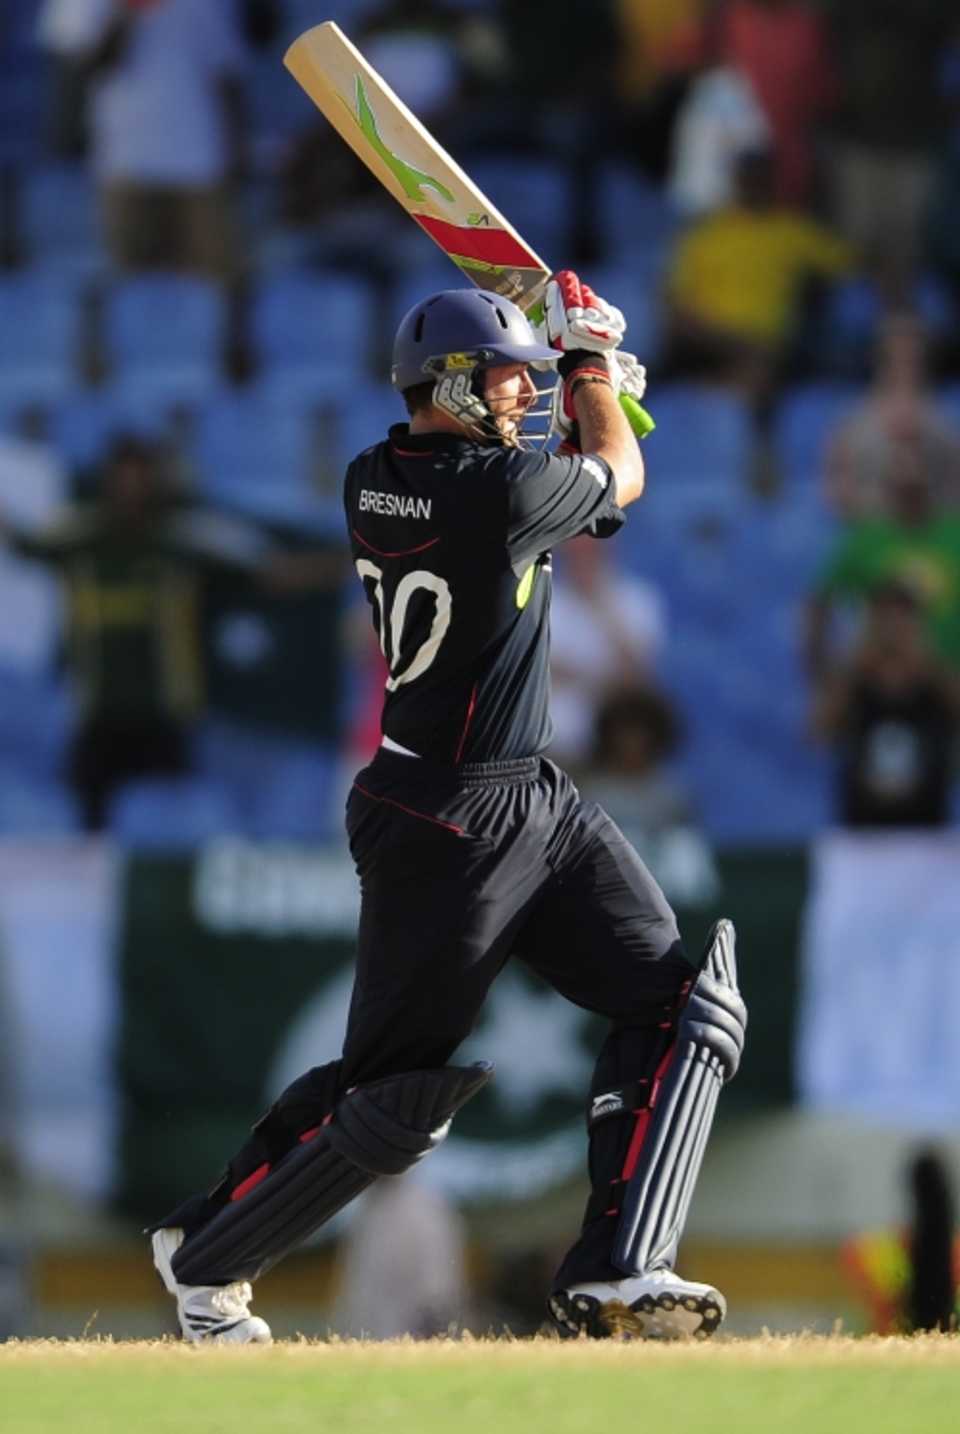 Tim Bresnan muscled his way to 23 from just 11 deliveries to see England home in the final over